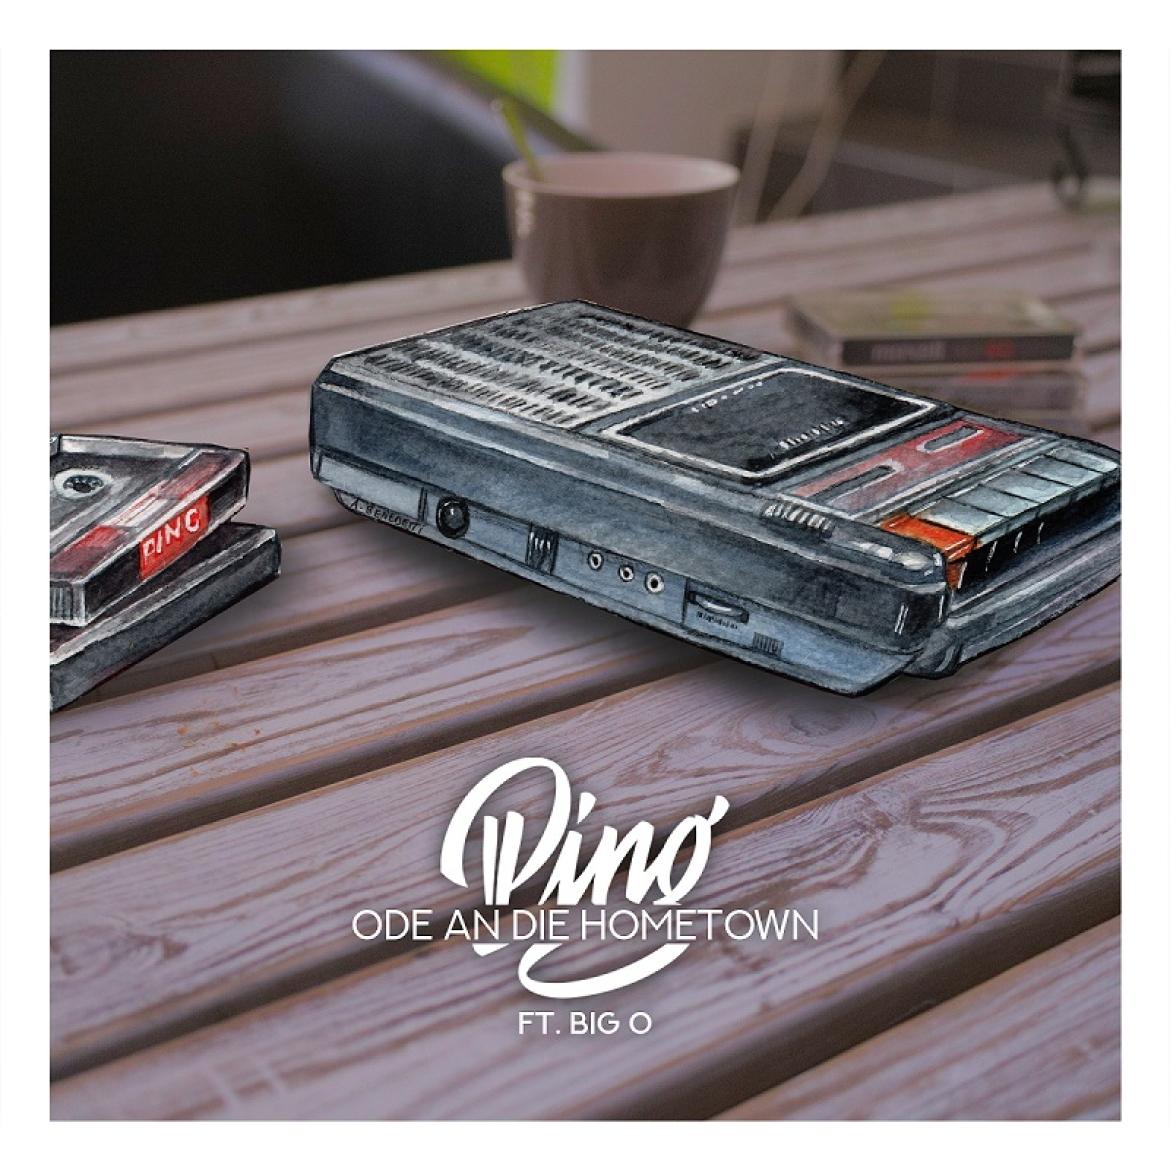 ping ex nihilo ode an die hometown big o